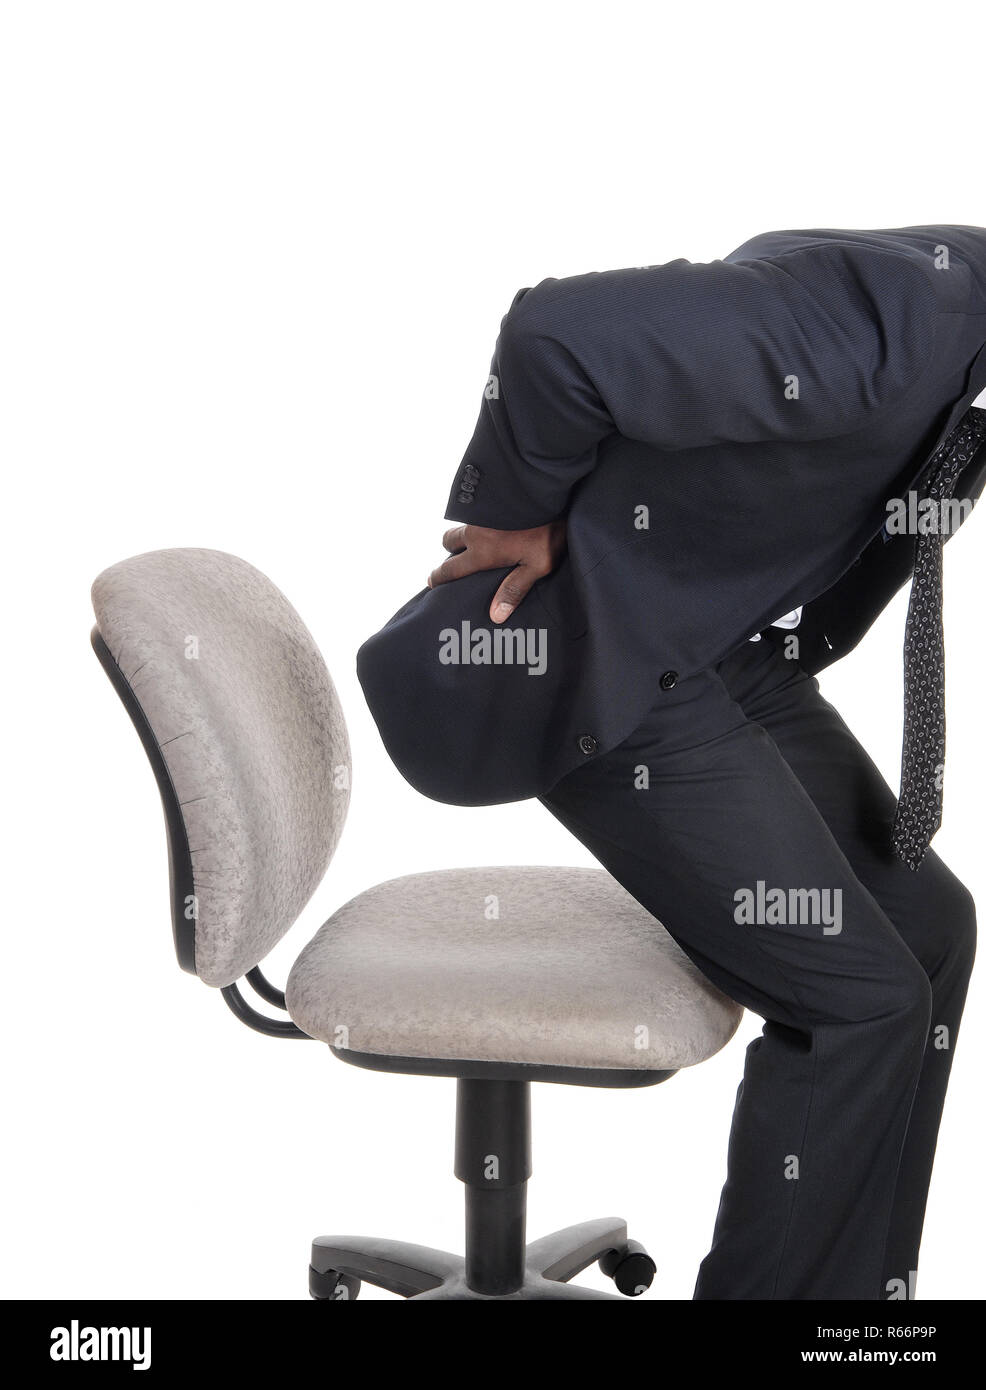 Man With Back Pain Getting Up From Chair Stock Photo 227571954